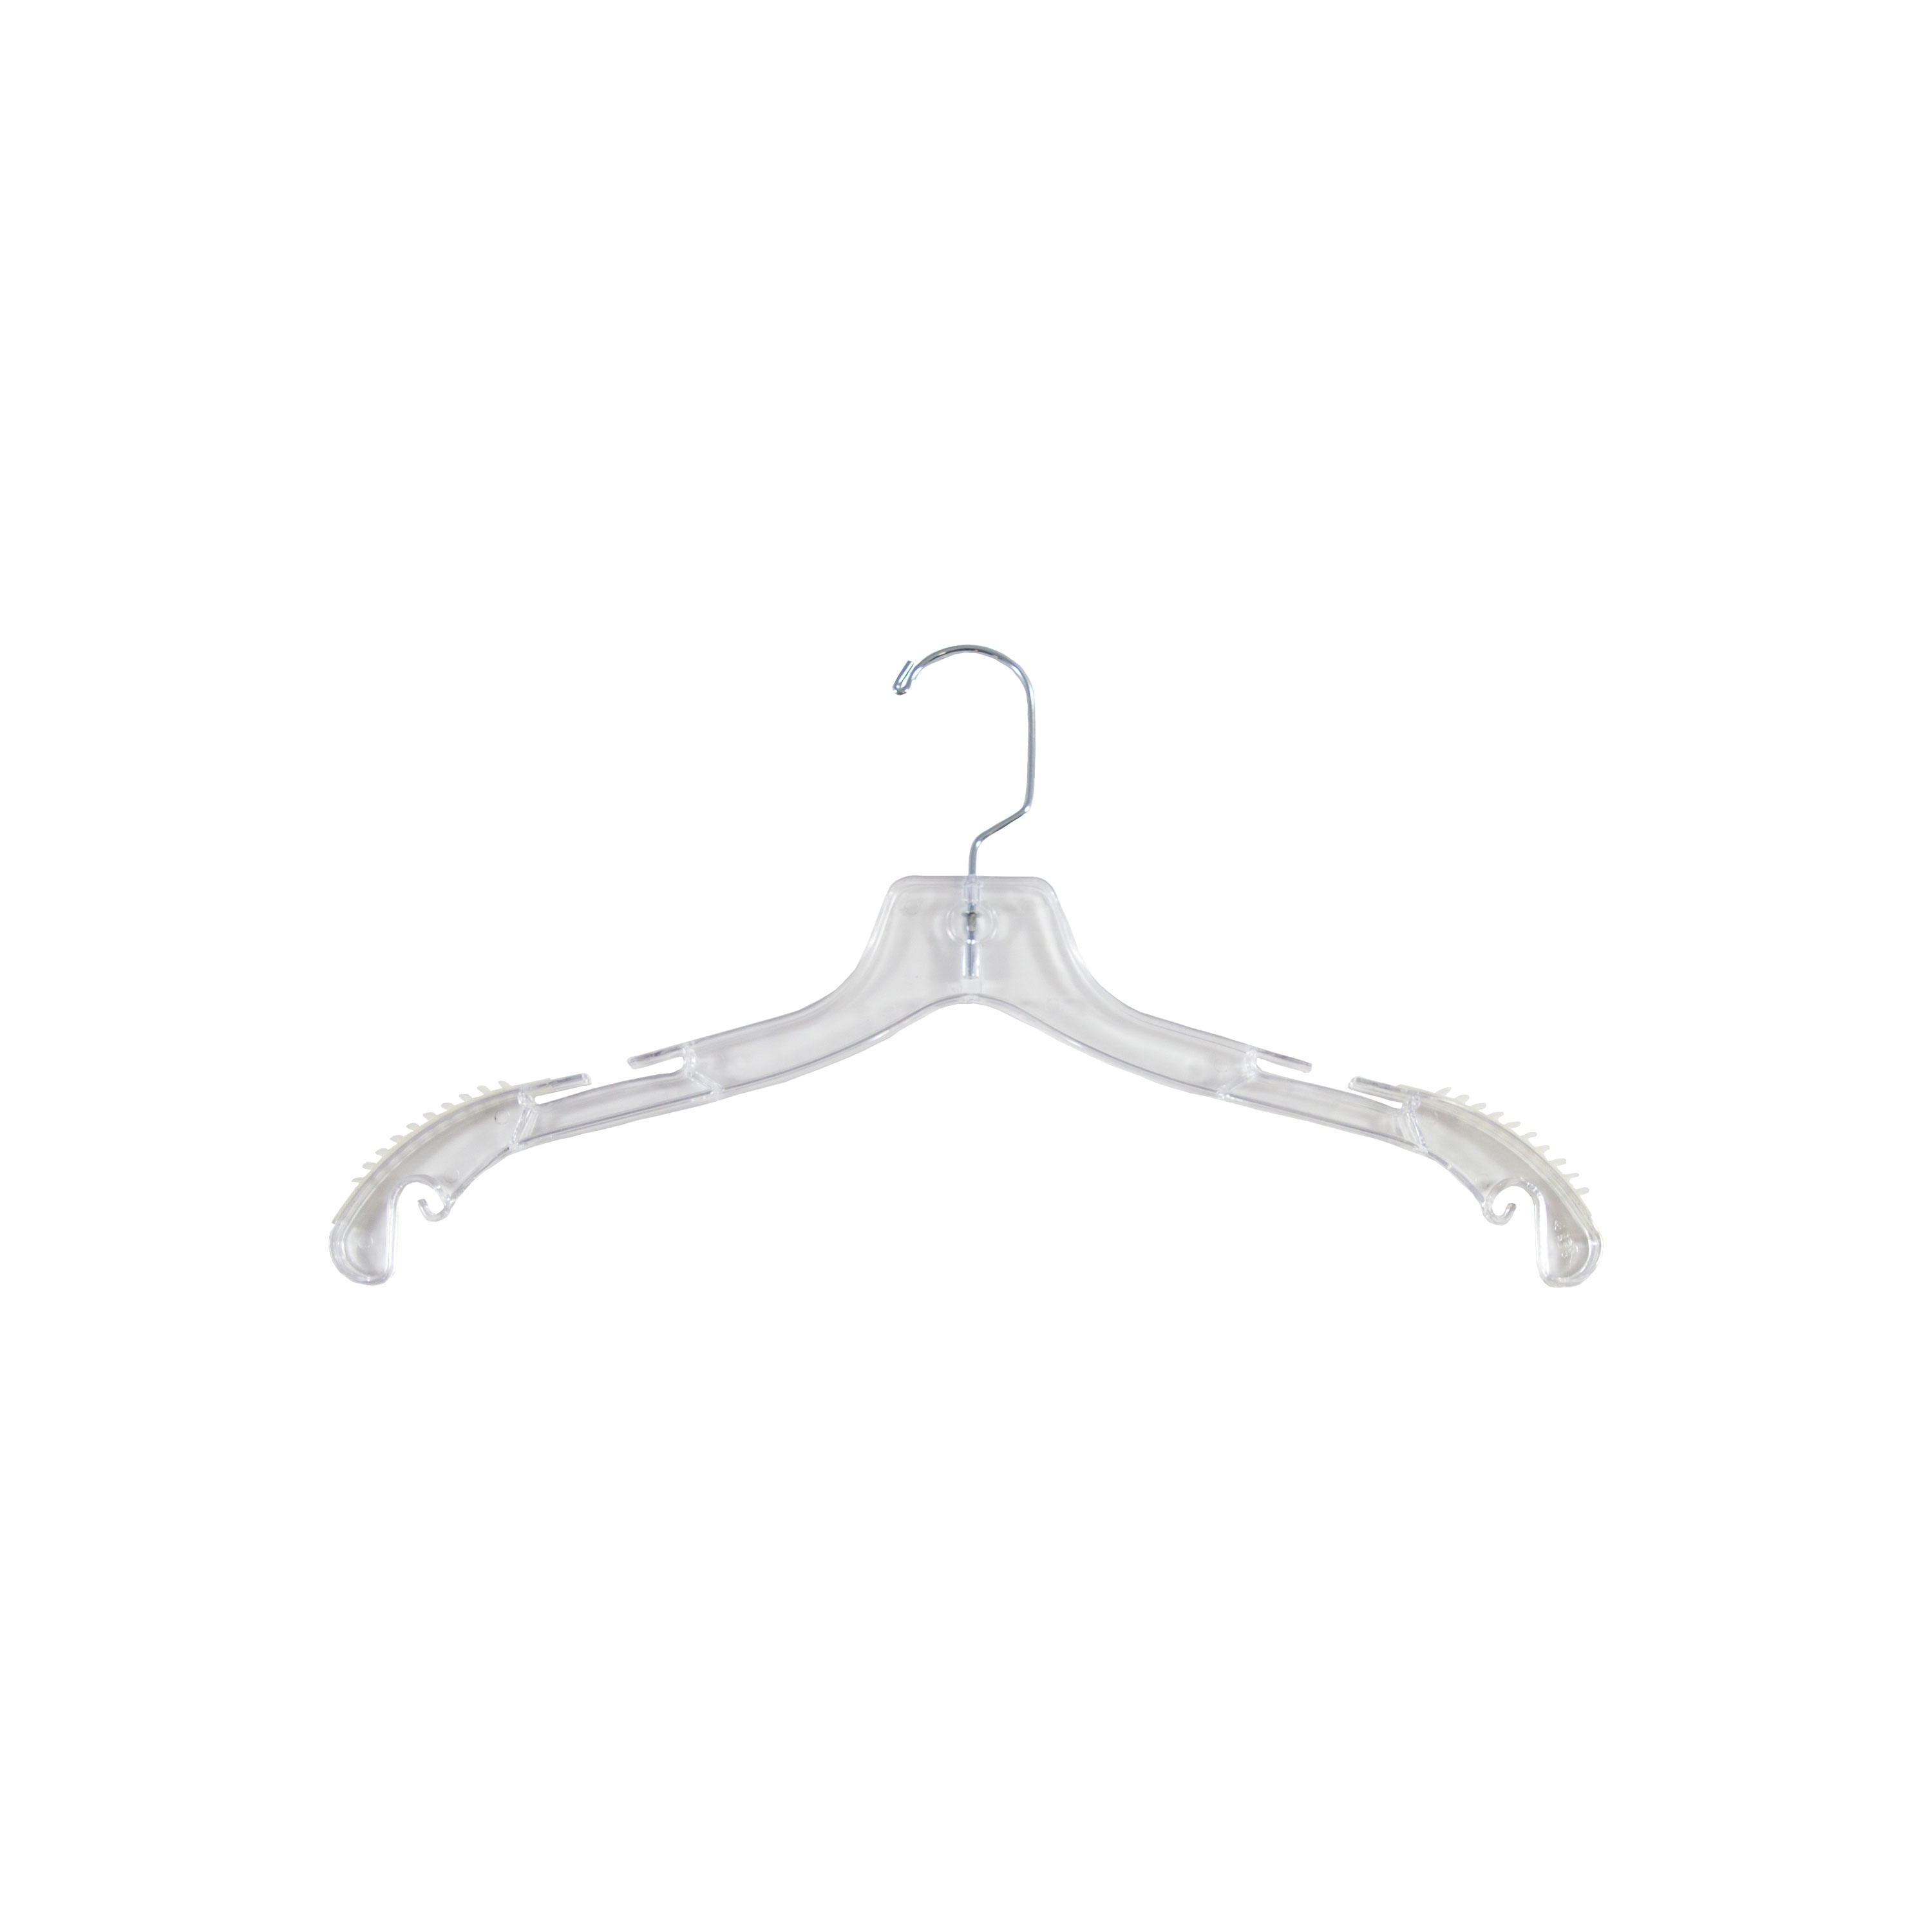 https://ak1.ostkcdn.com/images/products/is/images/direct/9818505dcaf47f778e2ce7133a839590c51c08c2/Clear-Plastic-Top-Hanger-W--Non-Slip-Rubber-Shoulder-Strips-%26-Notches%2C-17%22-Length-X-3-8%22-Thick%2C-Chrome-Hook-Box-of-100.jpg